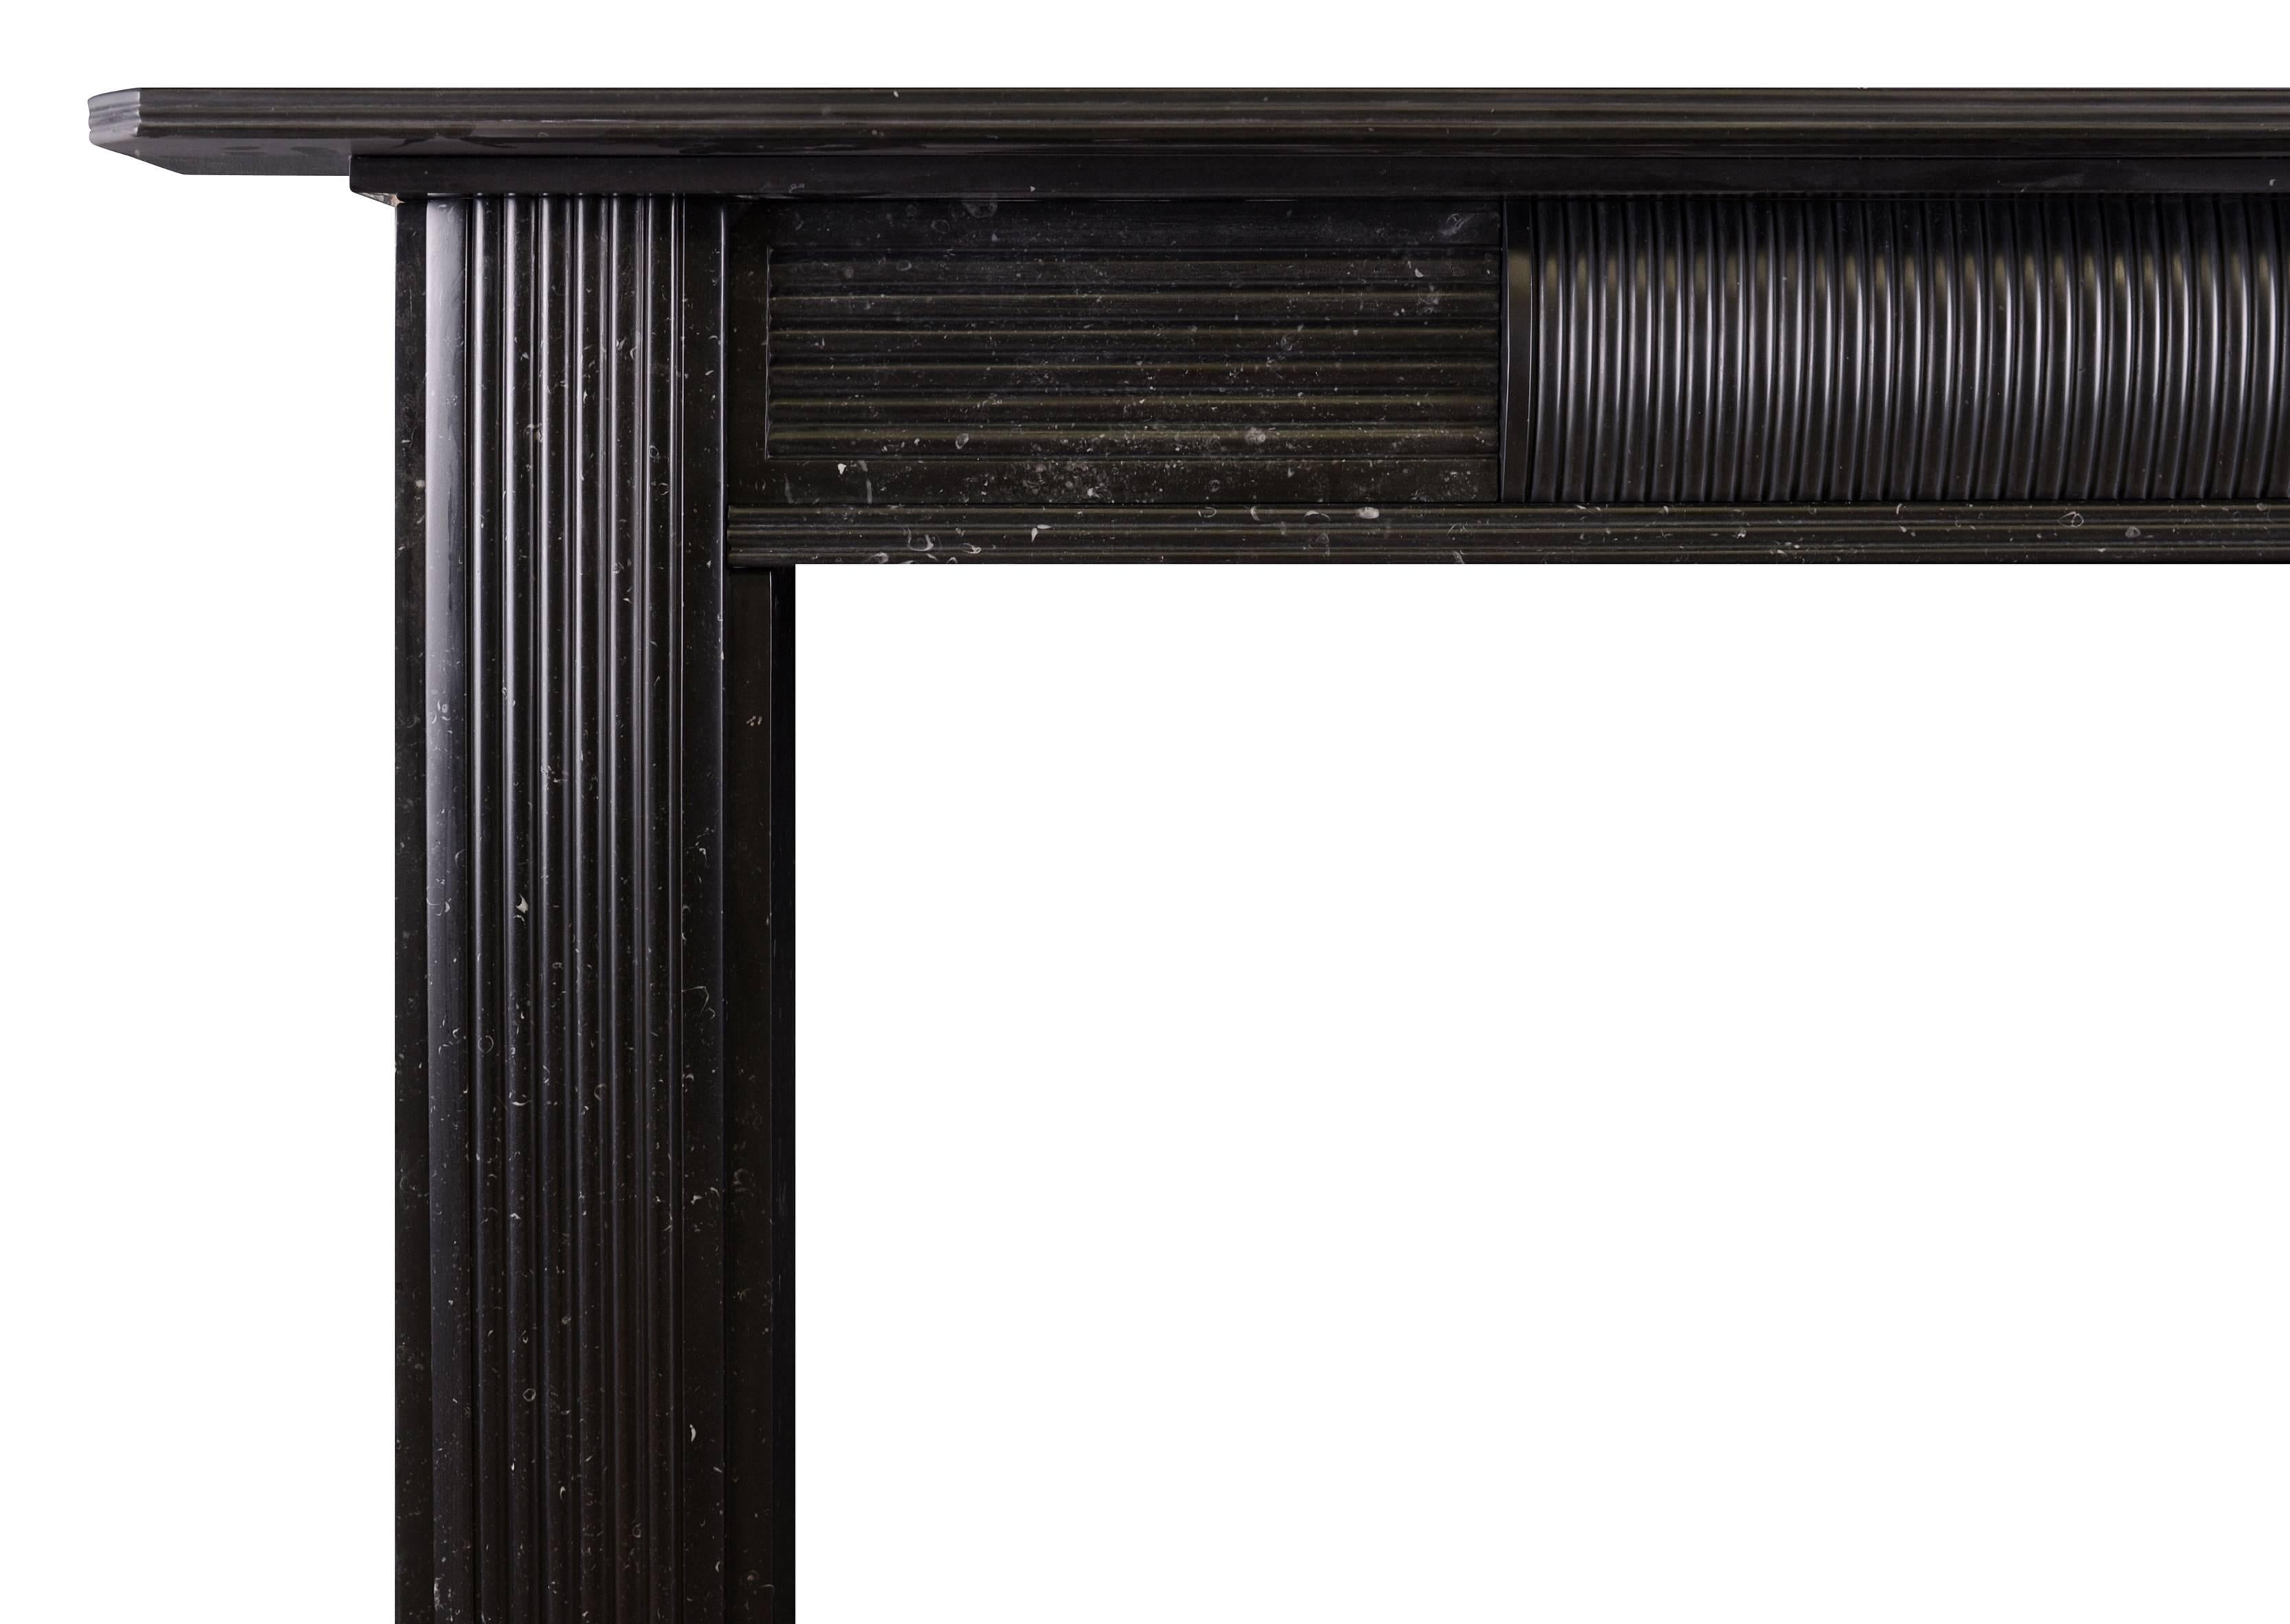 An English Regency marble fireplace in black Kilkenny marble. The reeded jambs surmounted by plain frieze with accompanying reeded centre block. Shaped shelf above. Part of a near pair with Stock No. 4304. A striking piece in an increasingly rare